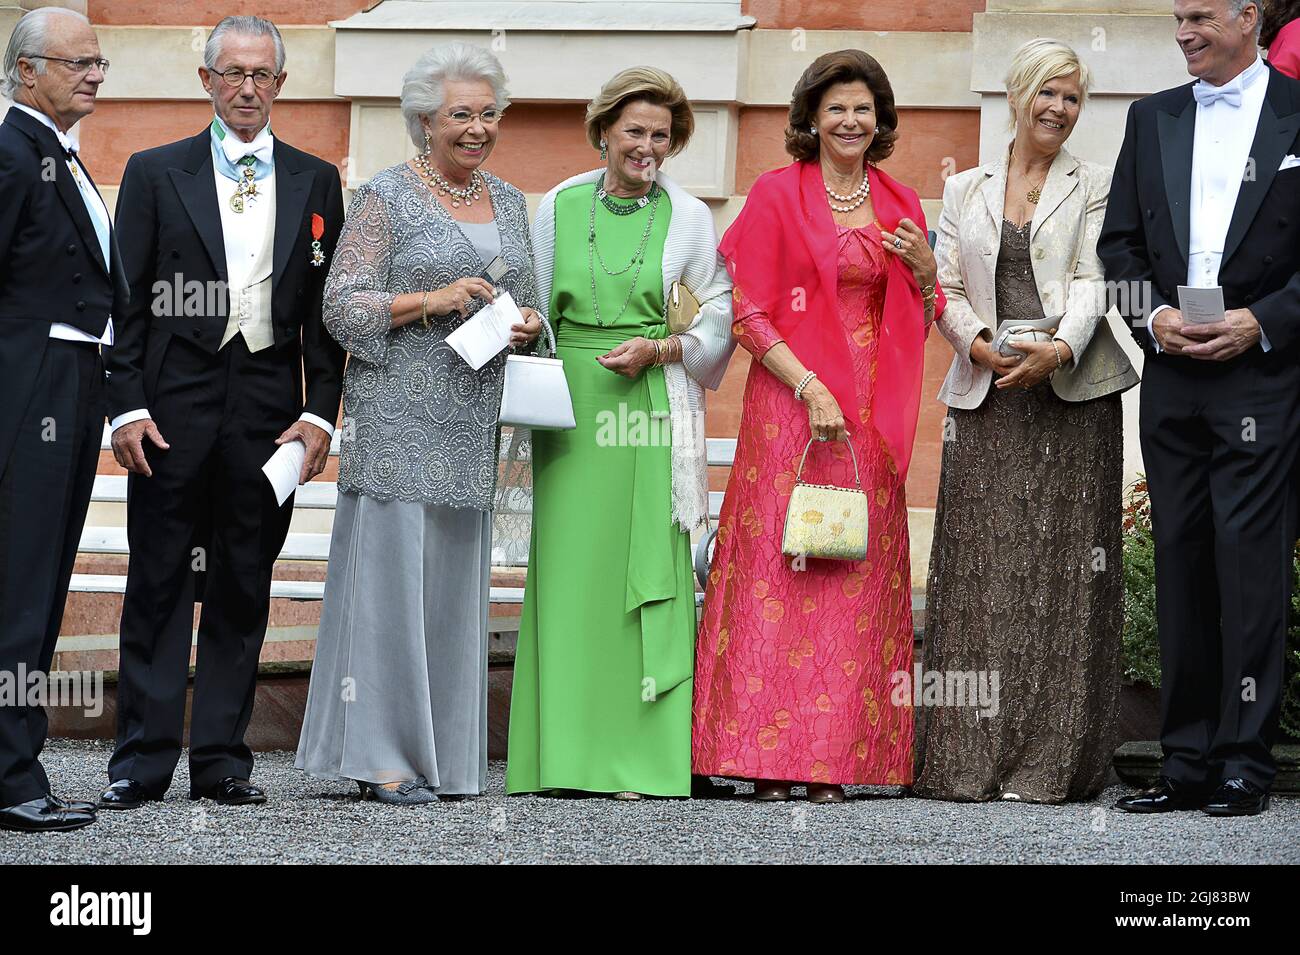 STOCKHOLM 2013-08-31 King Carl Gustaf, Tord Magnuson, Princess Christina, Queen Sonja, Queen Silvia and father of bride AndrÃ©n arrive for the wedding at the Ulriksdal Palace Chapel in Stockholm, Sweden, August 31, 2013. The Swedish Kings godson Gustaf Magnuson (son of Princess Christina and Tord Magnuson) married model Vicky AndrÃ©n Saturday. Photo Jonas Ekstromer / SCANPIX / ** SWEDEN OUT ** Stock Photo